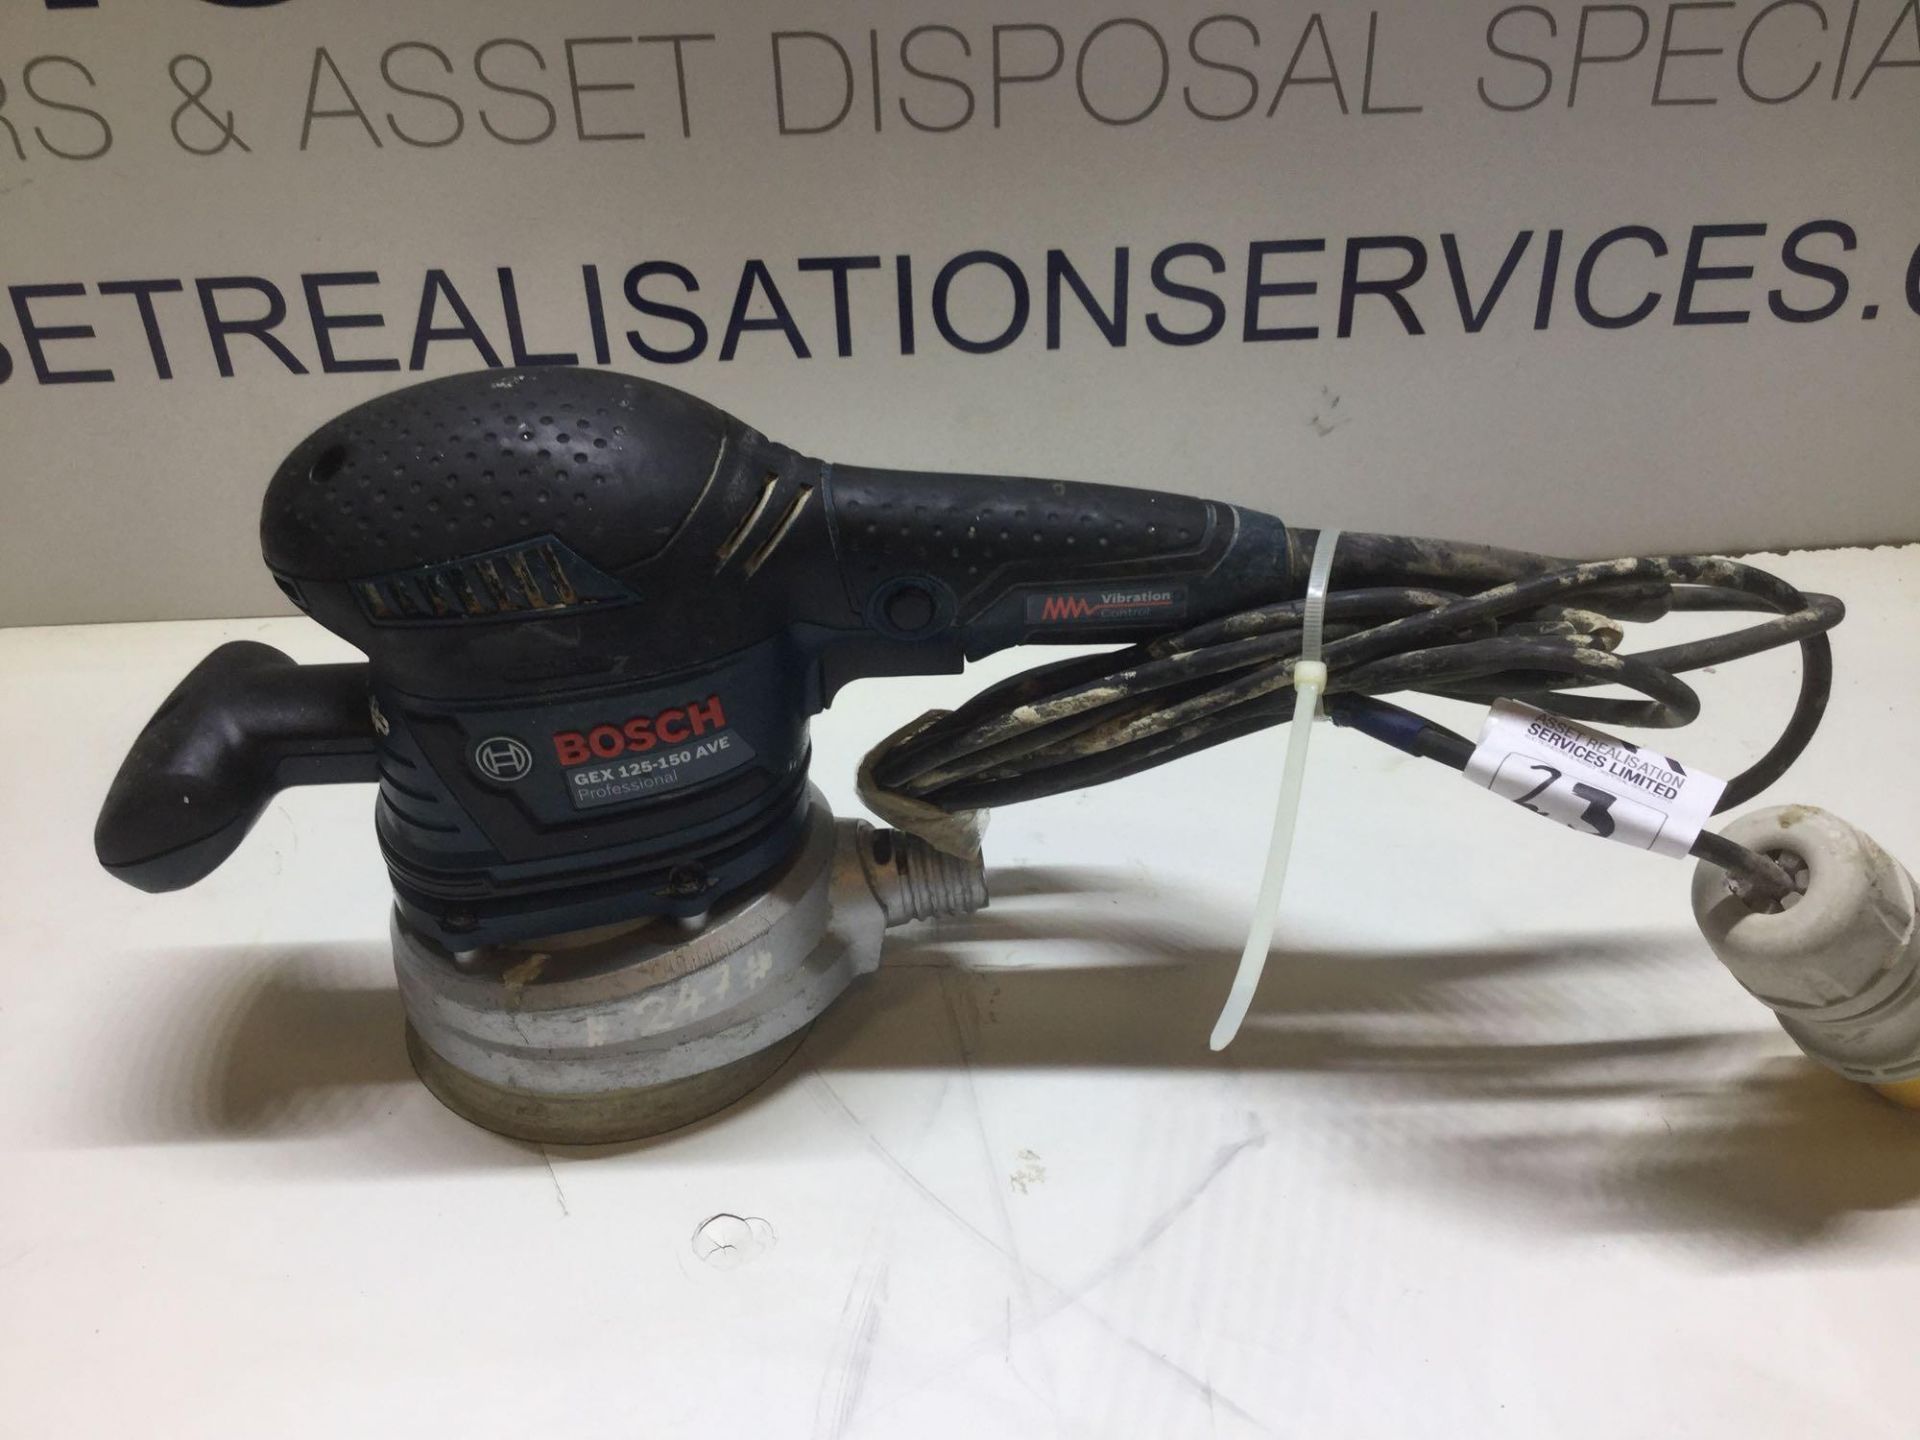 Bosch GEX 125-150 AVE ORBITAL Sander With Vibration Control 110v - Image 2 of 4